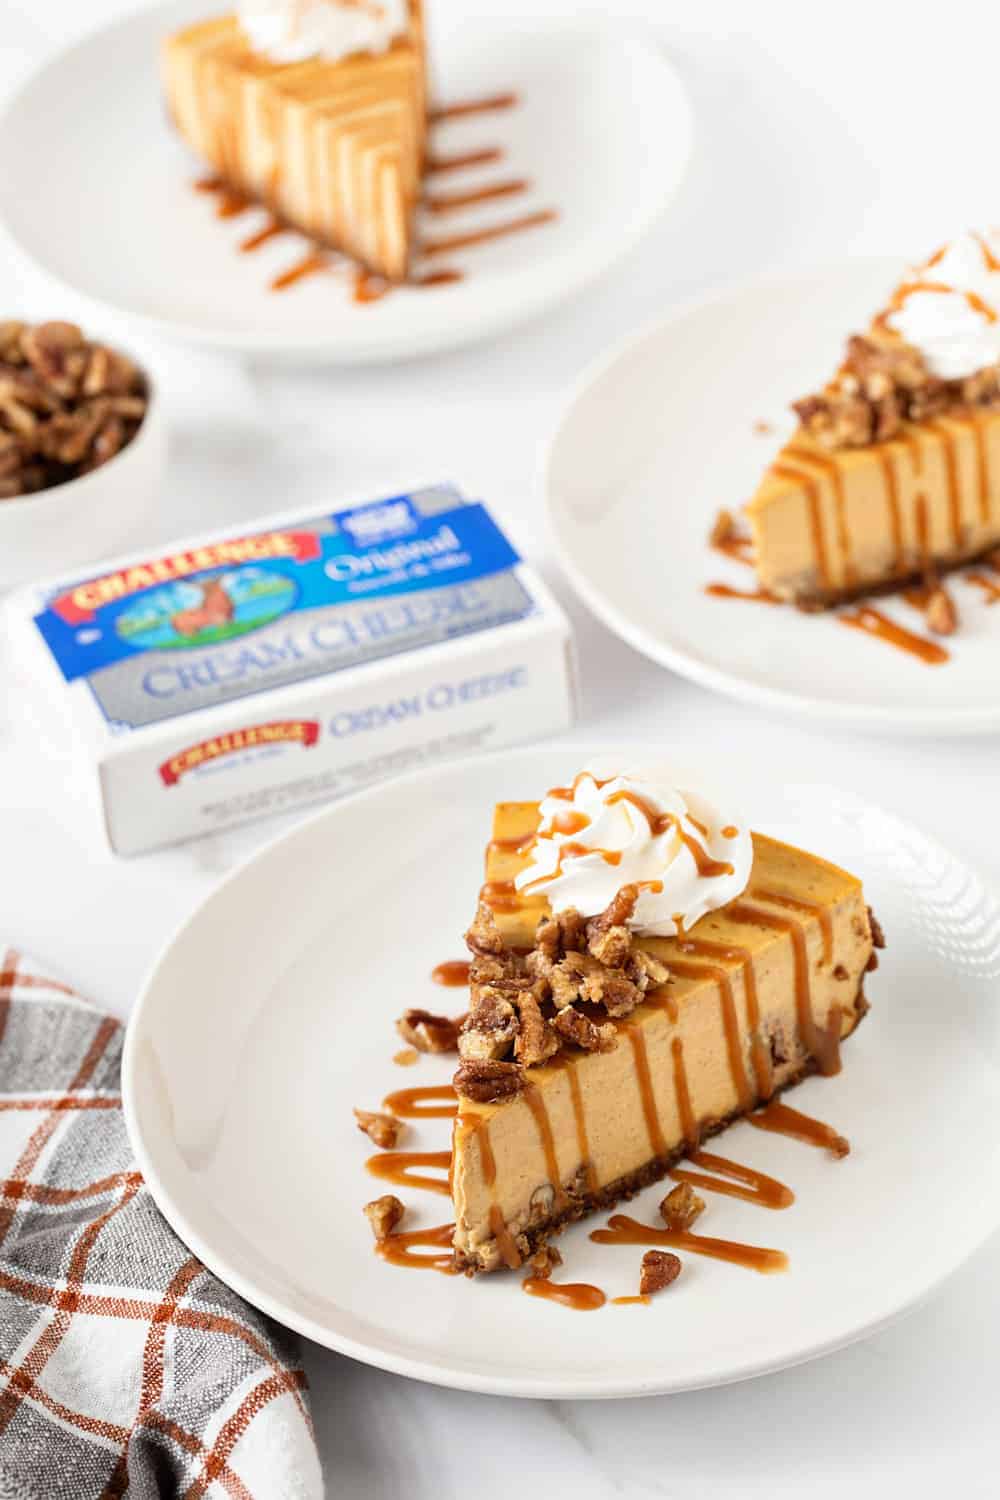 Pumpkin Praline Cheesecake combines sweet praline pecans with creamy pumpkin cheesecake and a gingersnap crust. So perfect for the holidays!